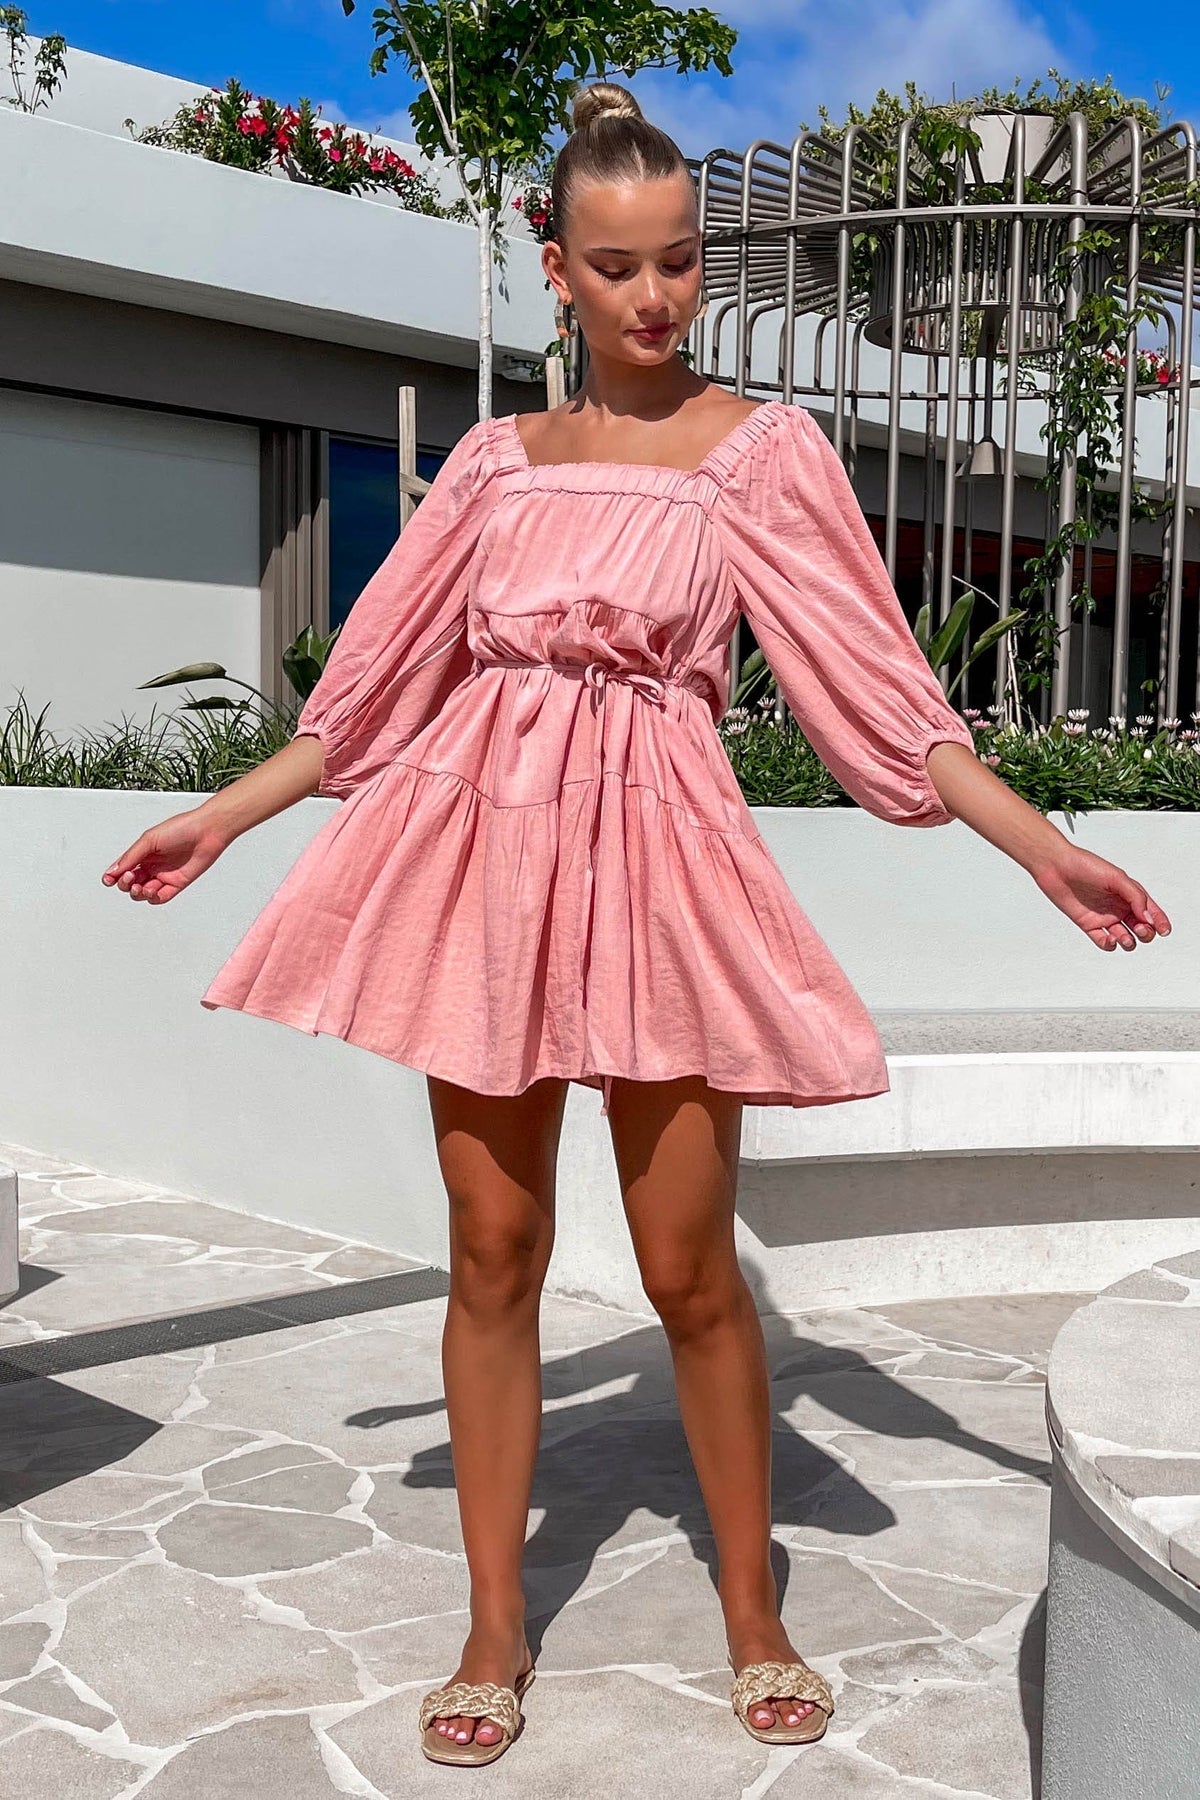 Sellia Dress, COTTON &amp; POLYESTER, COTTON AND POLYESTER, DRESS, DRESSES, LONG SLEEVE, MINI DRESS, new arrivals, OFF SHOULDER, PINK, POLYESTER AND COTTON, WAIST TIE, , -MISHKAH